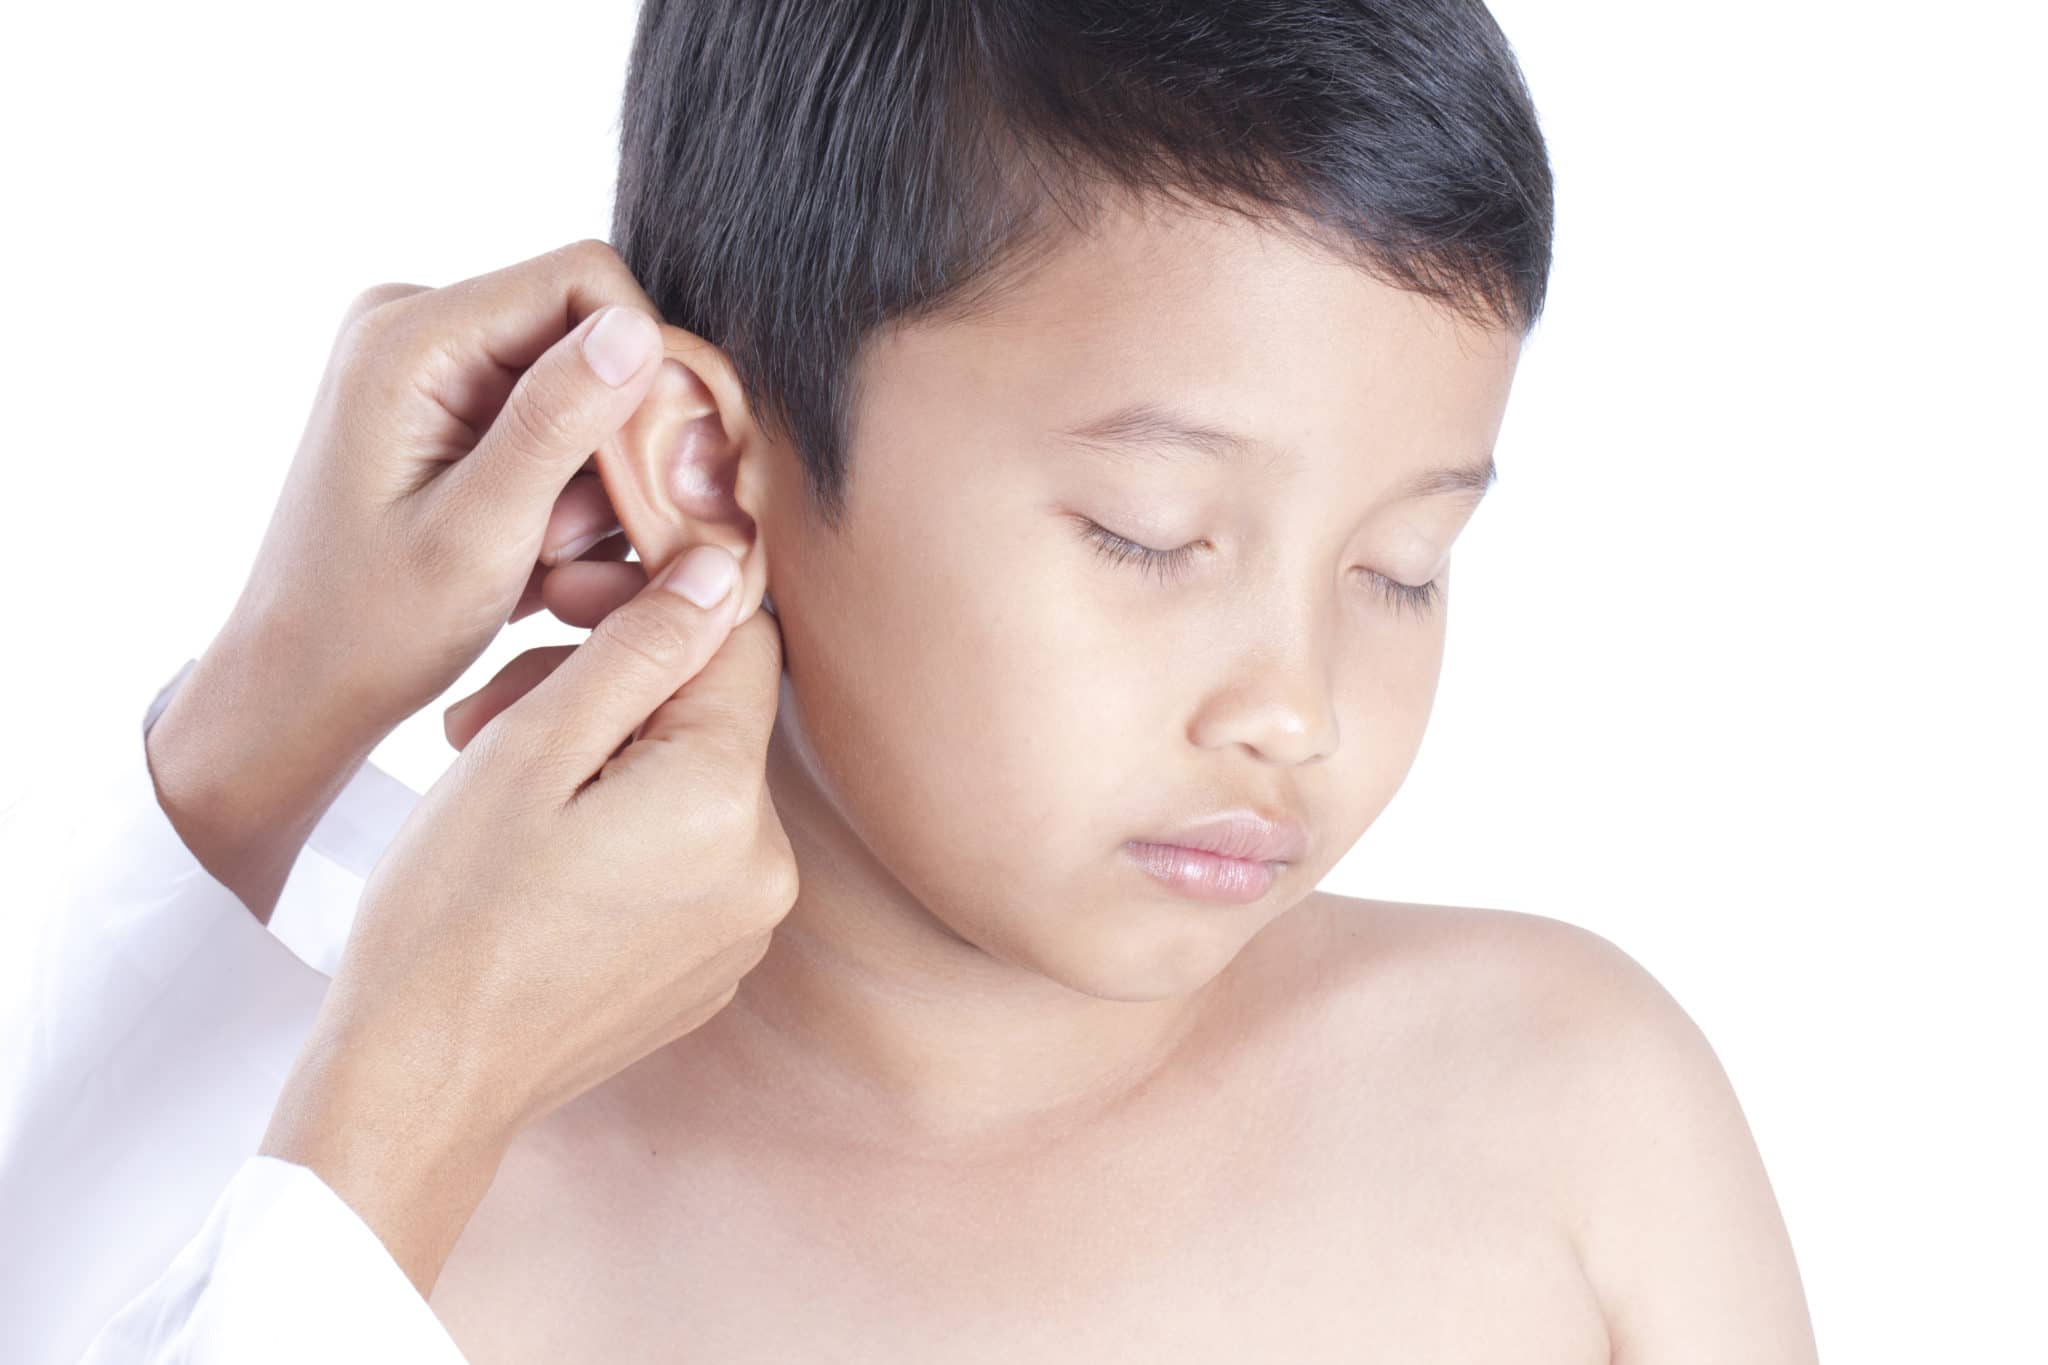 Doctor examining little boy's ears, isolated on white background